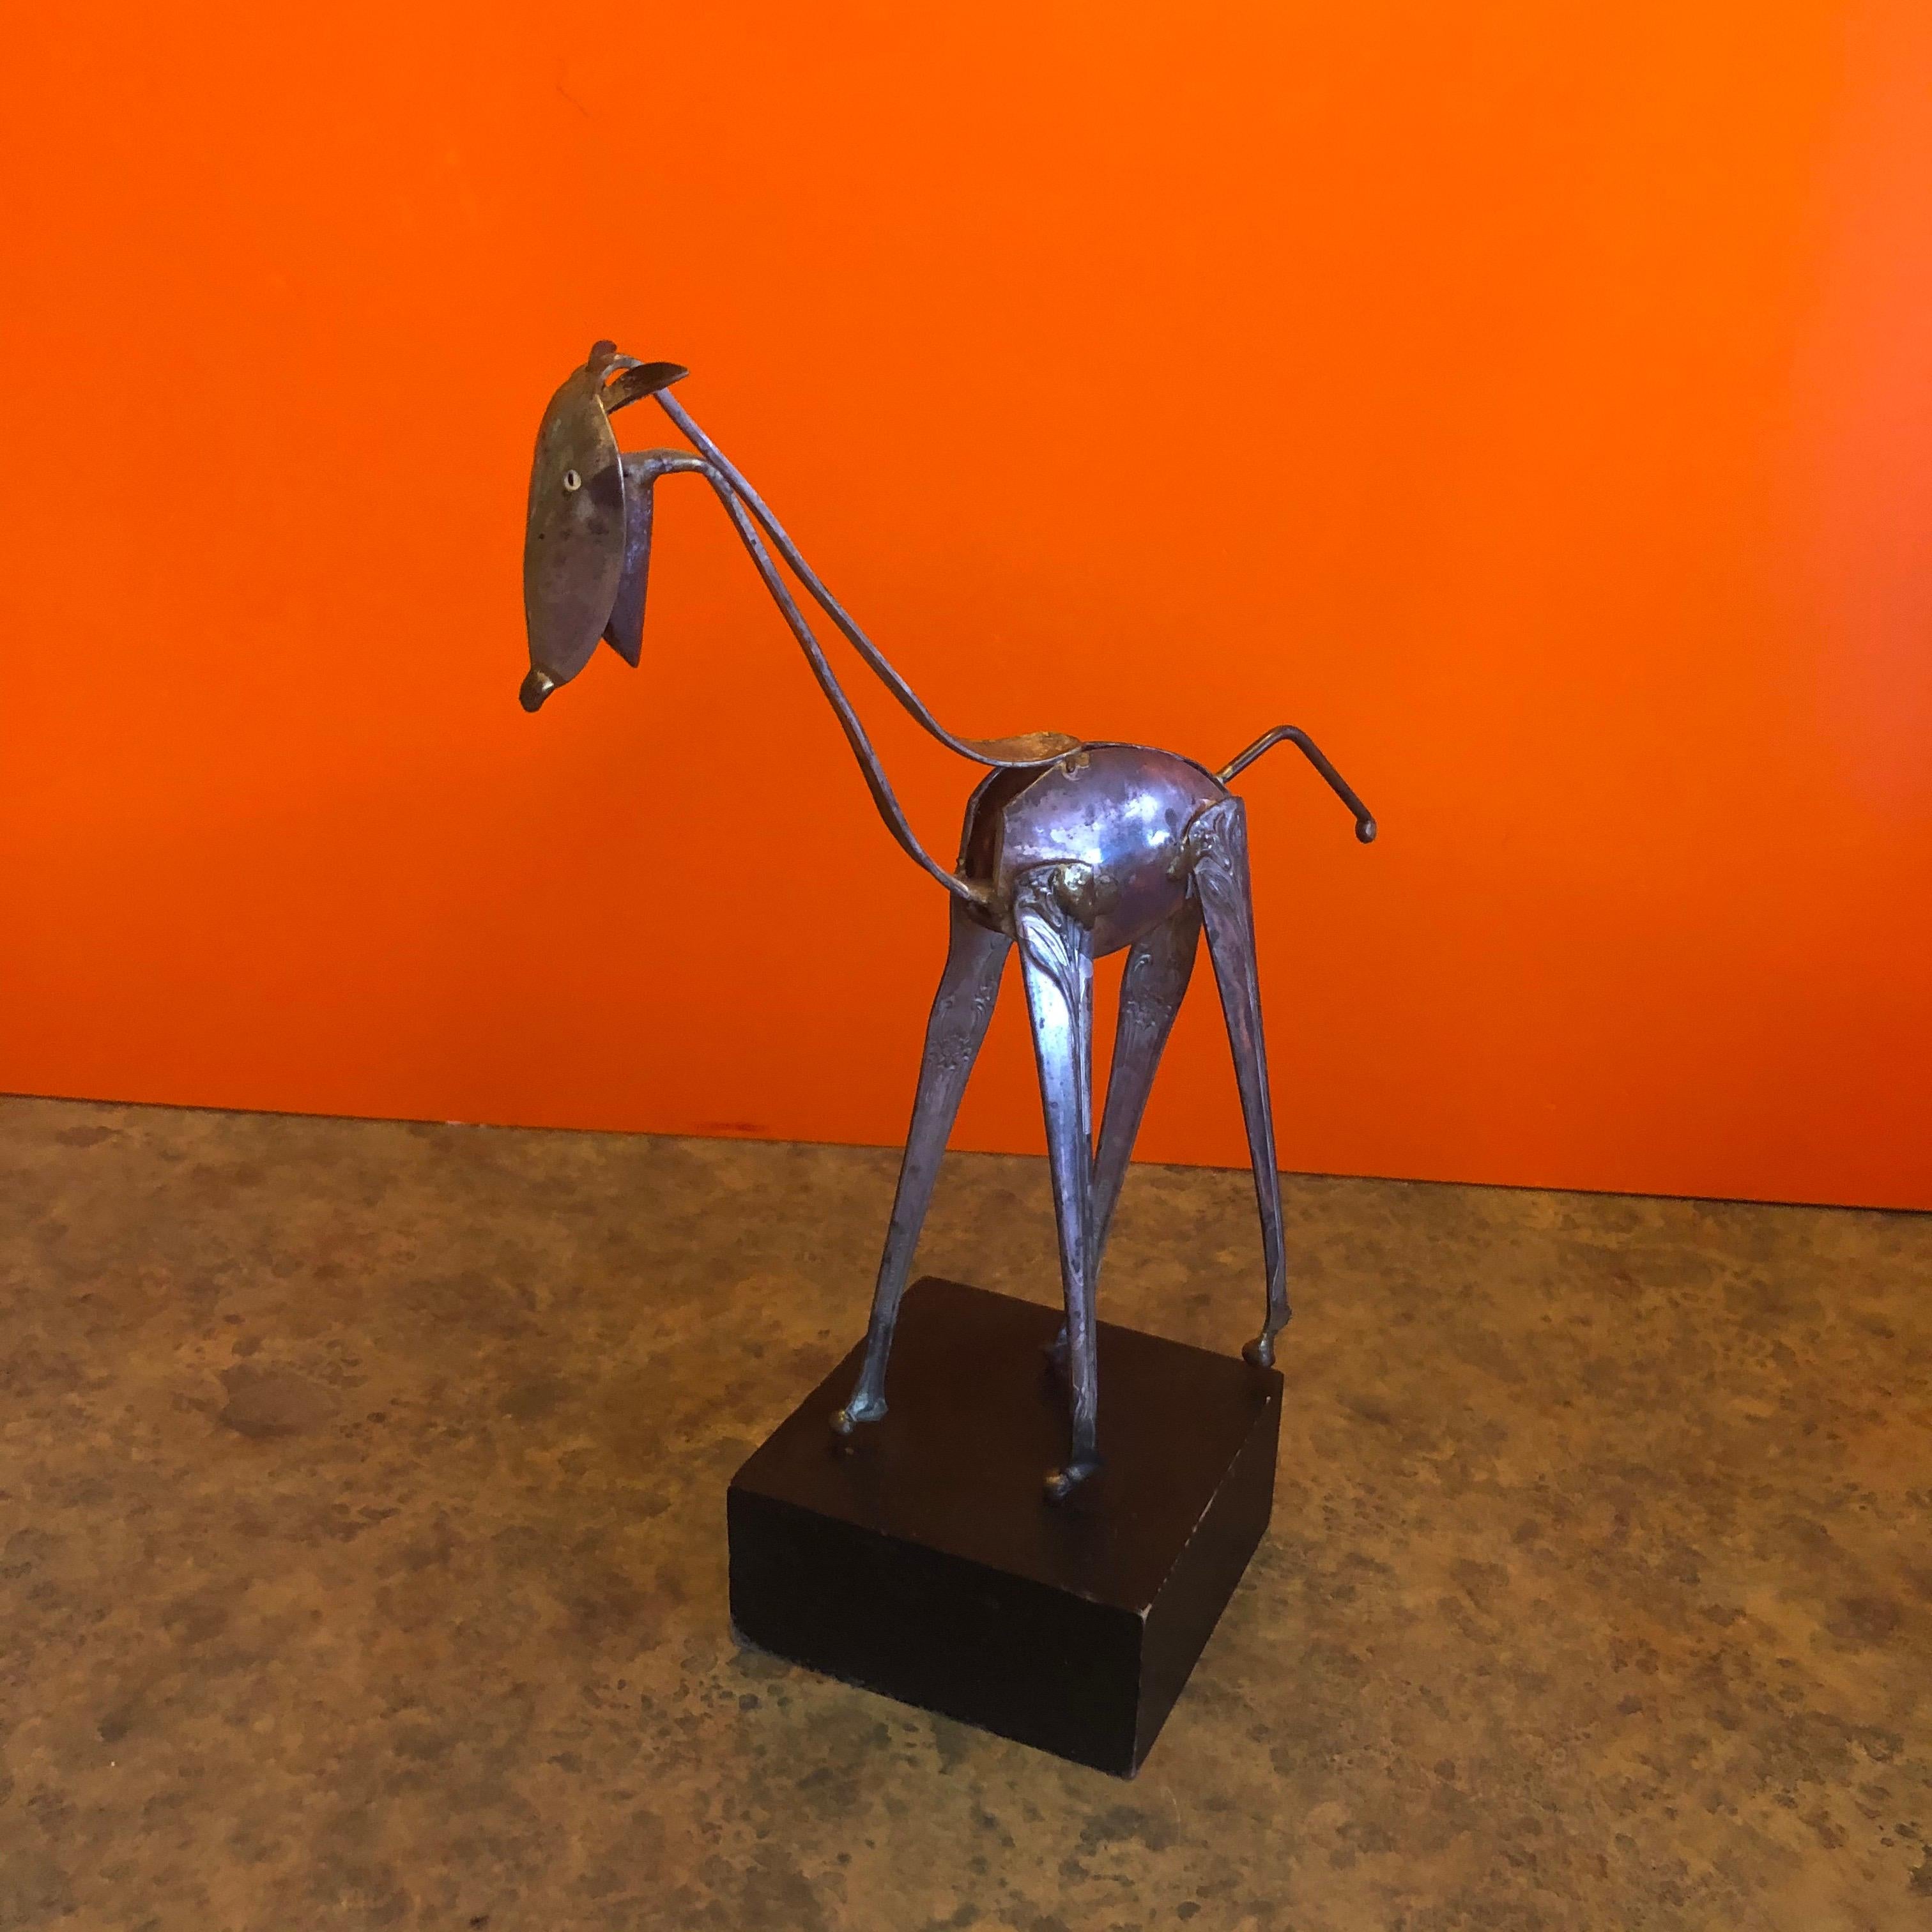 Modern silver plate spoon giraffe sculpture by Raul Zuniga for Casa Del Arte, circa 1971.
 
The whimsical piece is made from silver plated spoons and various found household objects of copper. The sculpture is mounted on a 4